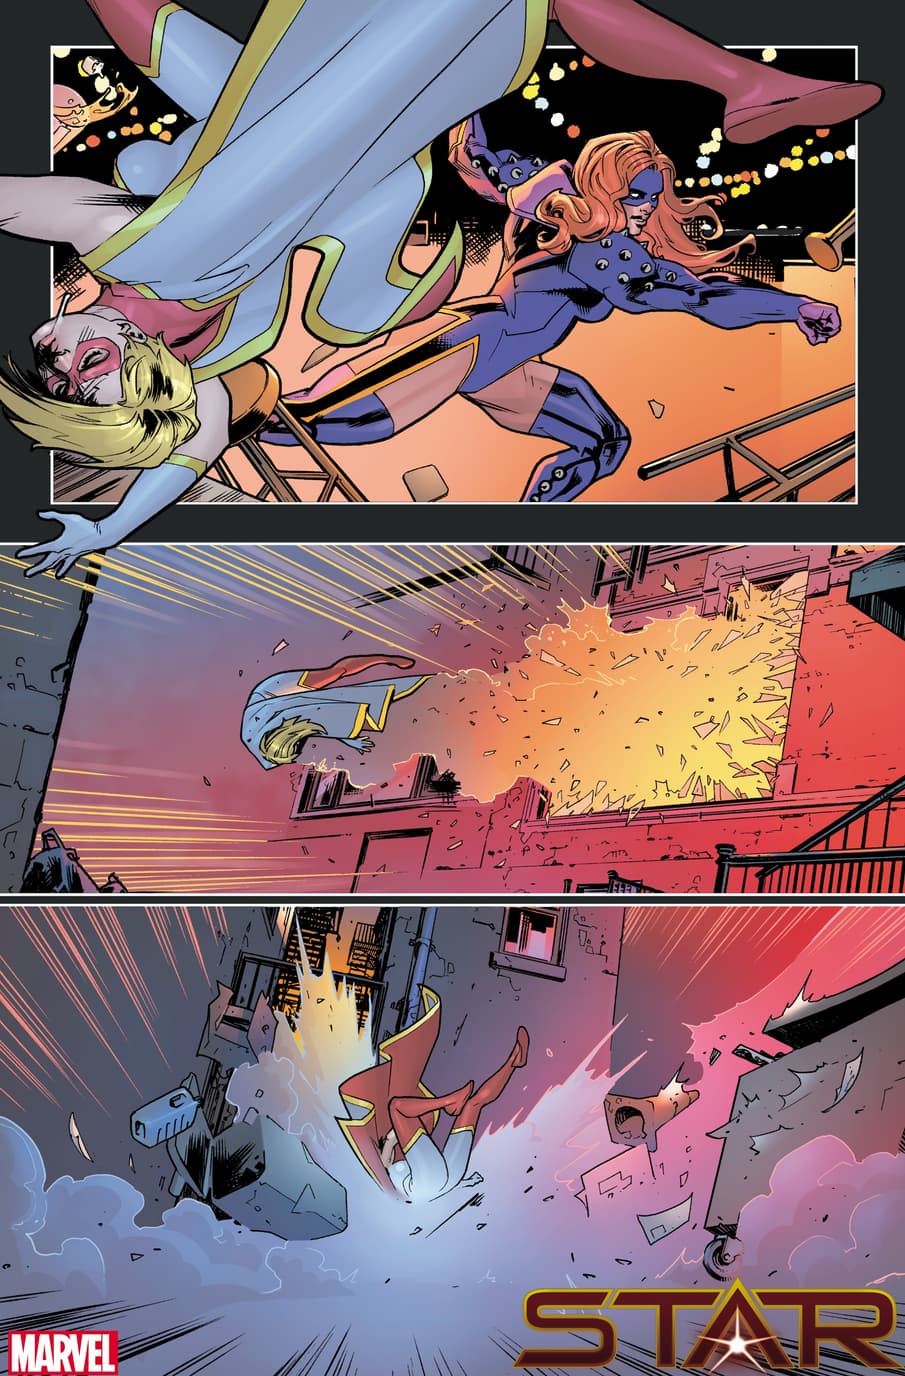 STAR #1 preview art by Javier Pina and Filipe Andrade with colors by Jesus Aburtov